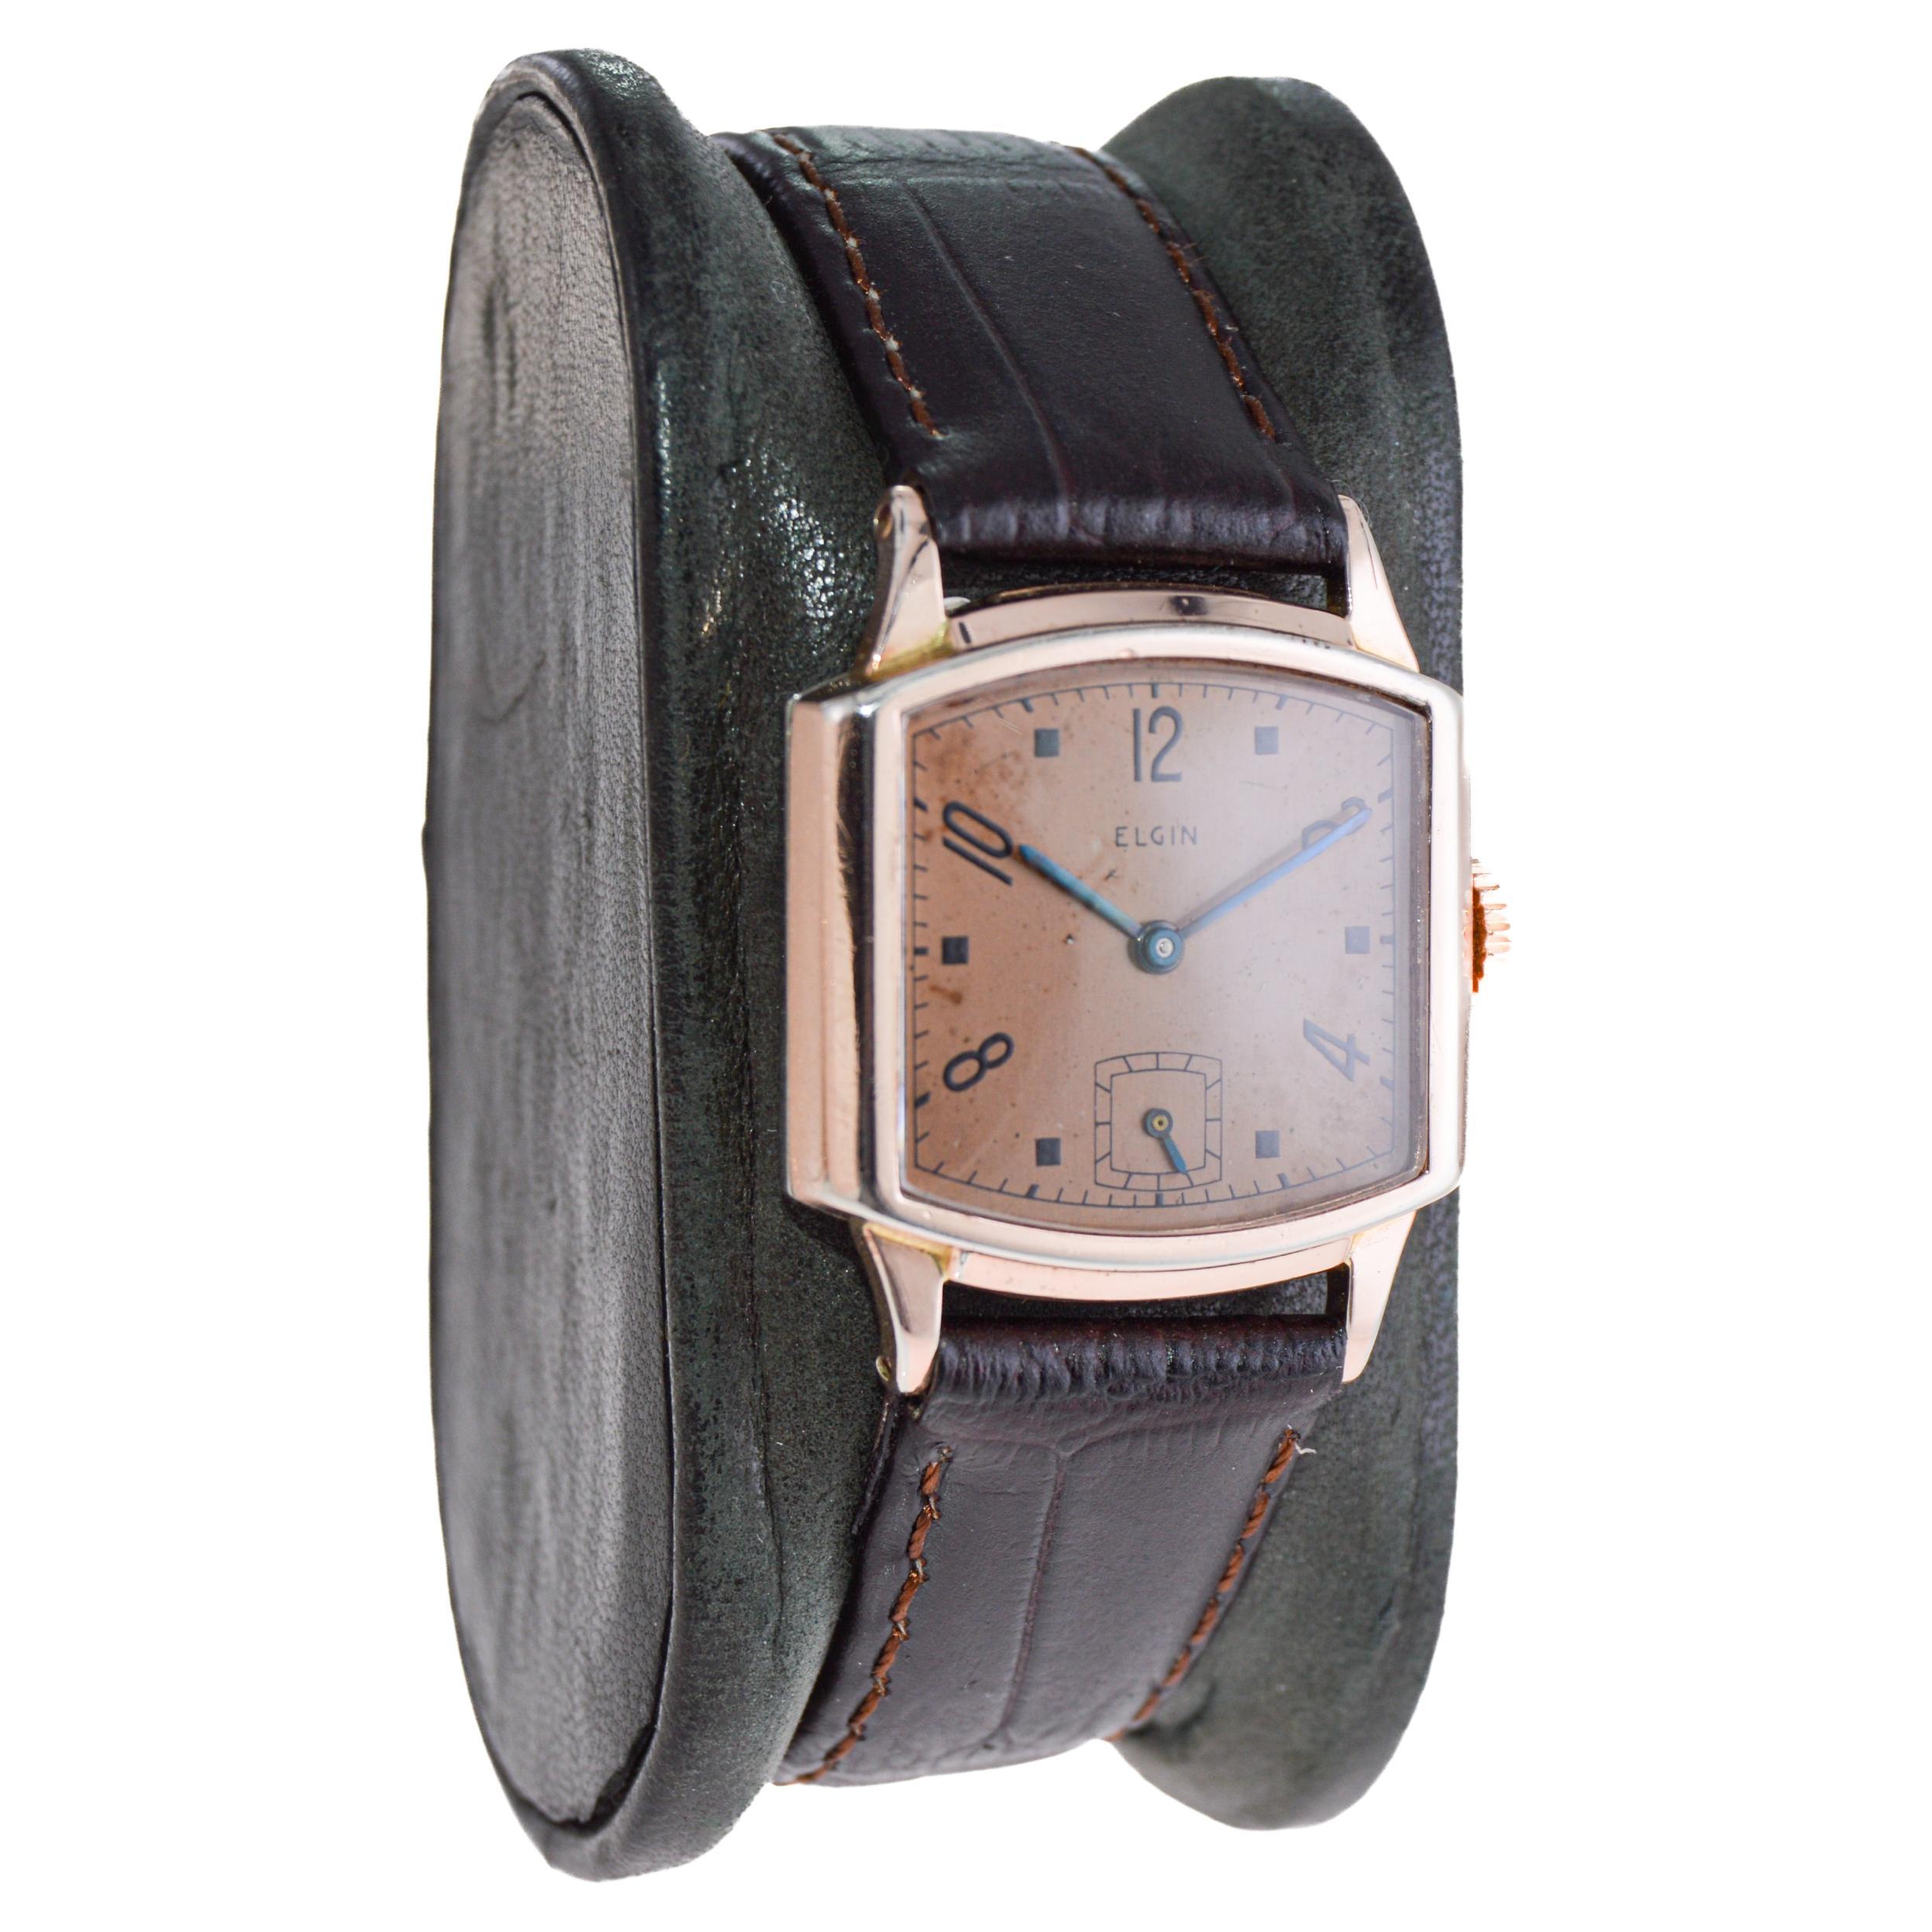 FACTORY / HOUSE: Elgin Watch Company
STYLE / REFERENCE: Art Deco / Tortue Shape
METAL / MATERIAL: Rose Gold Filled
CIRCA / YEAR: 1940's
DIMENSIONS / SIZE: Length 32mm X Width 26mm
MOVEMENT / CALIBER: Manual Winding / 15 Jewels / Caliber 554
DIAL /